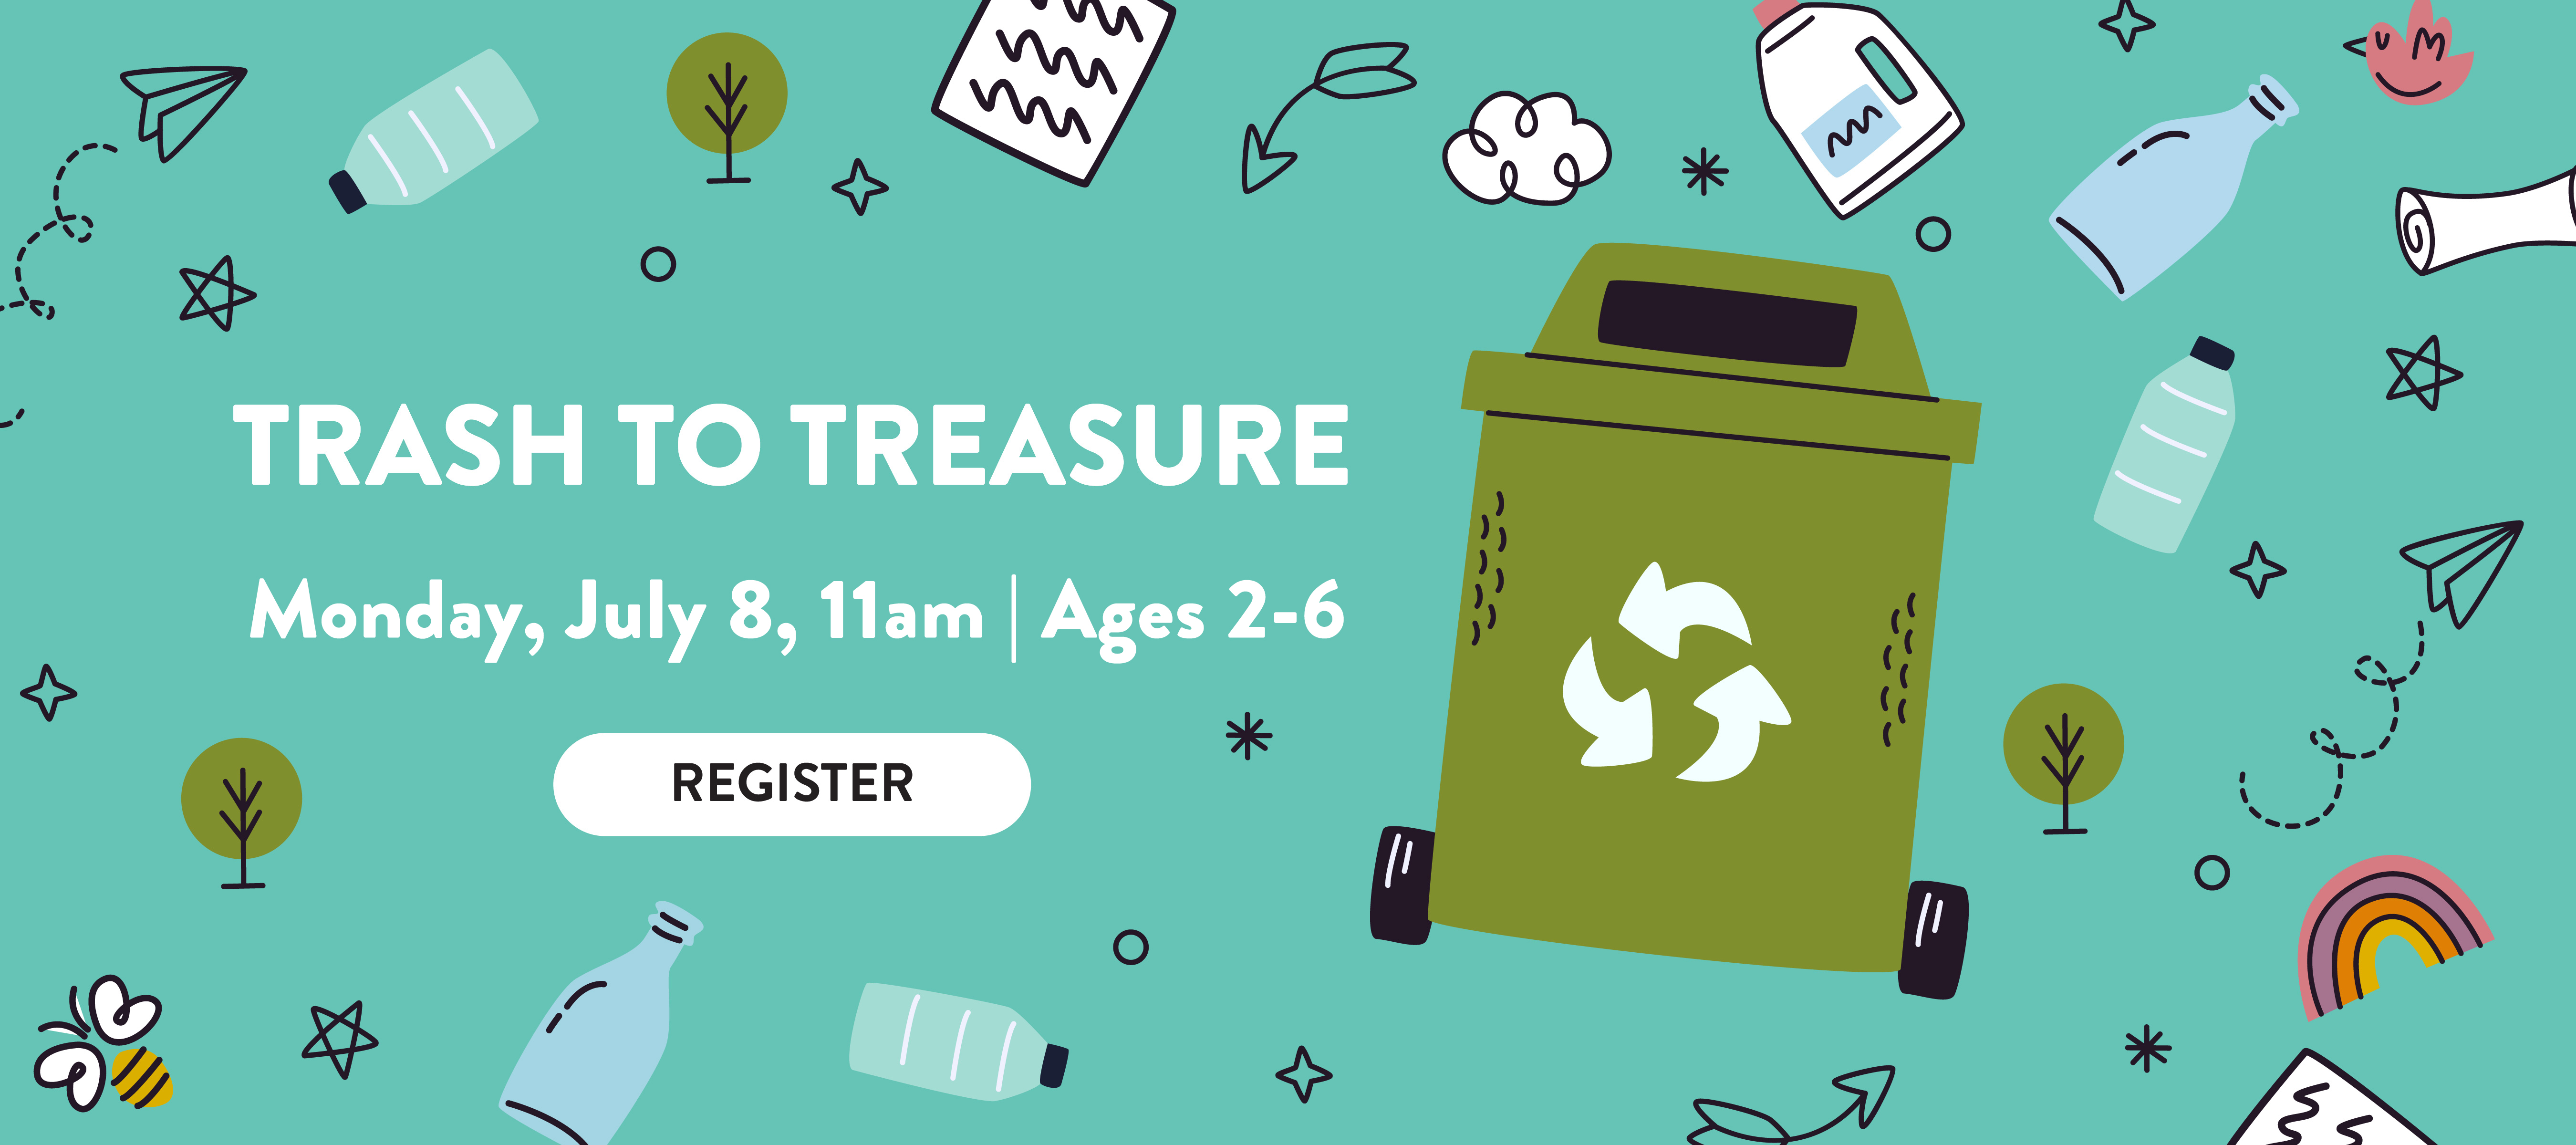 phpl, Prospect Heights Public Library, Trash to Treasure, make art from recycled materials, repurposed materials, creative art, Youth